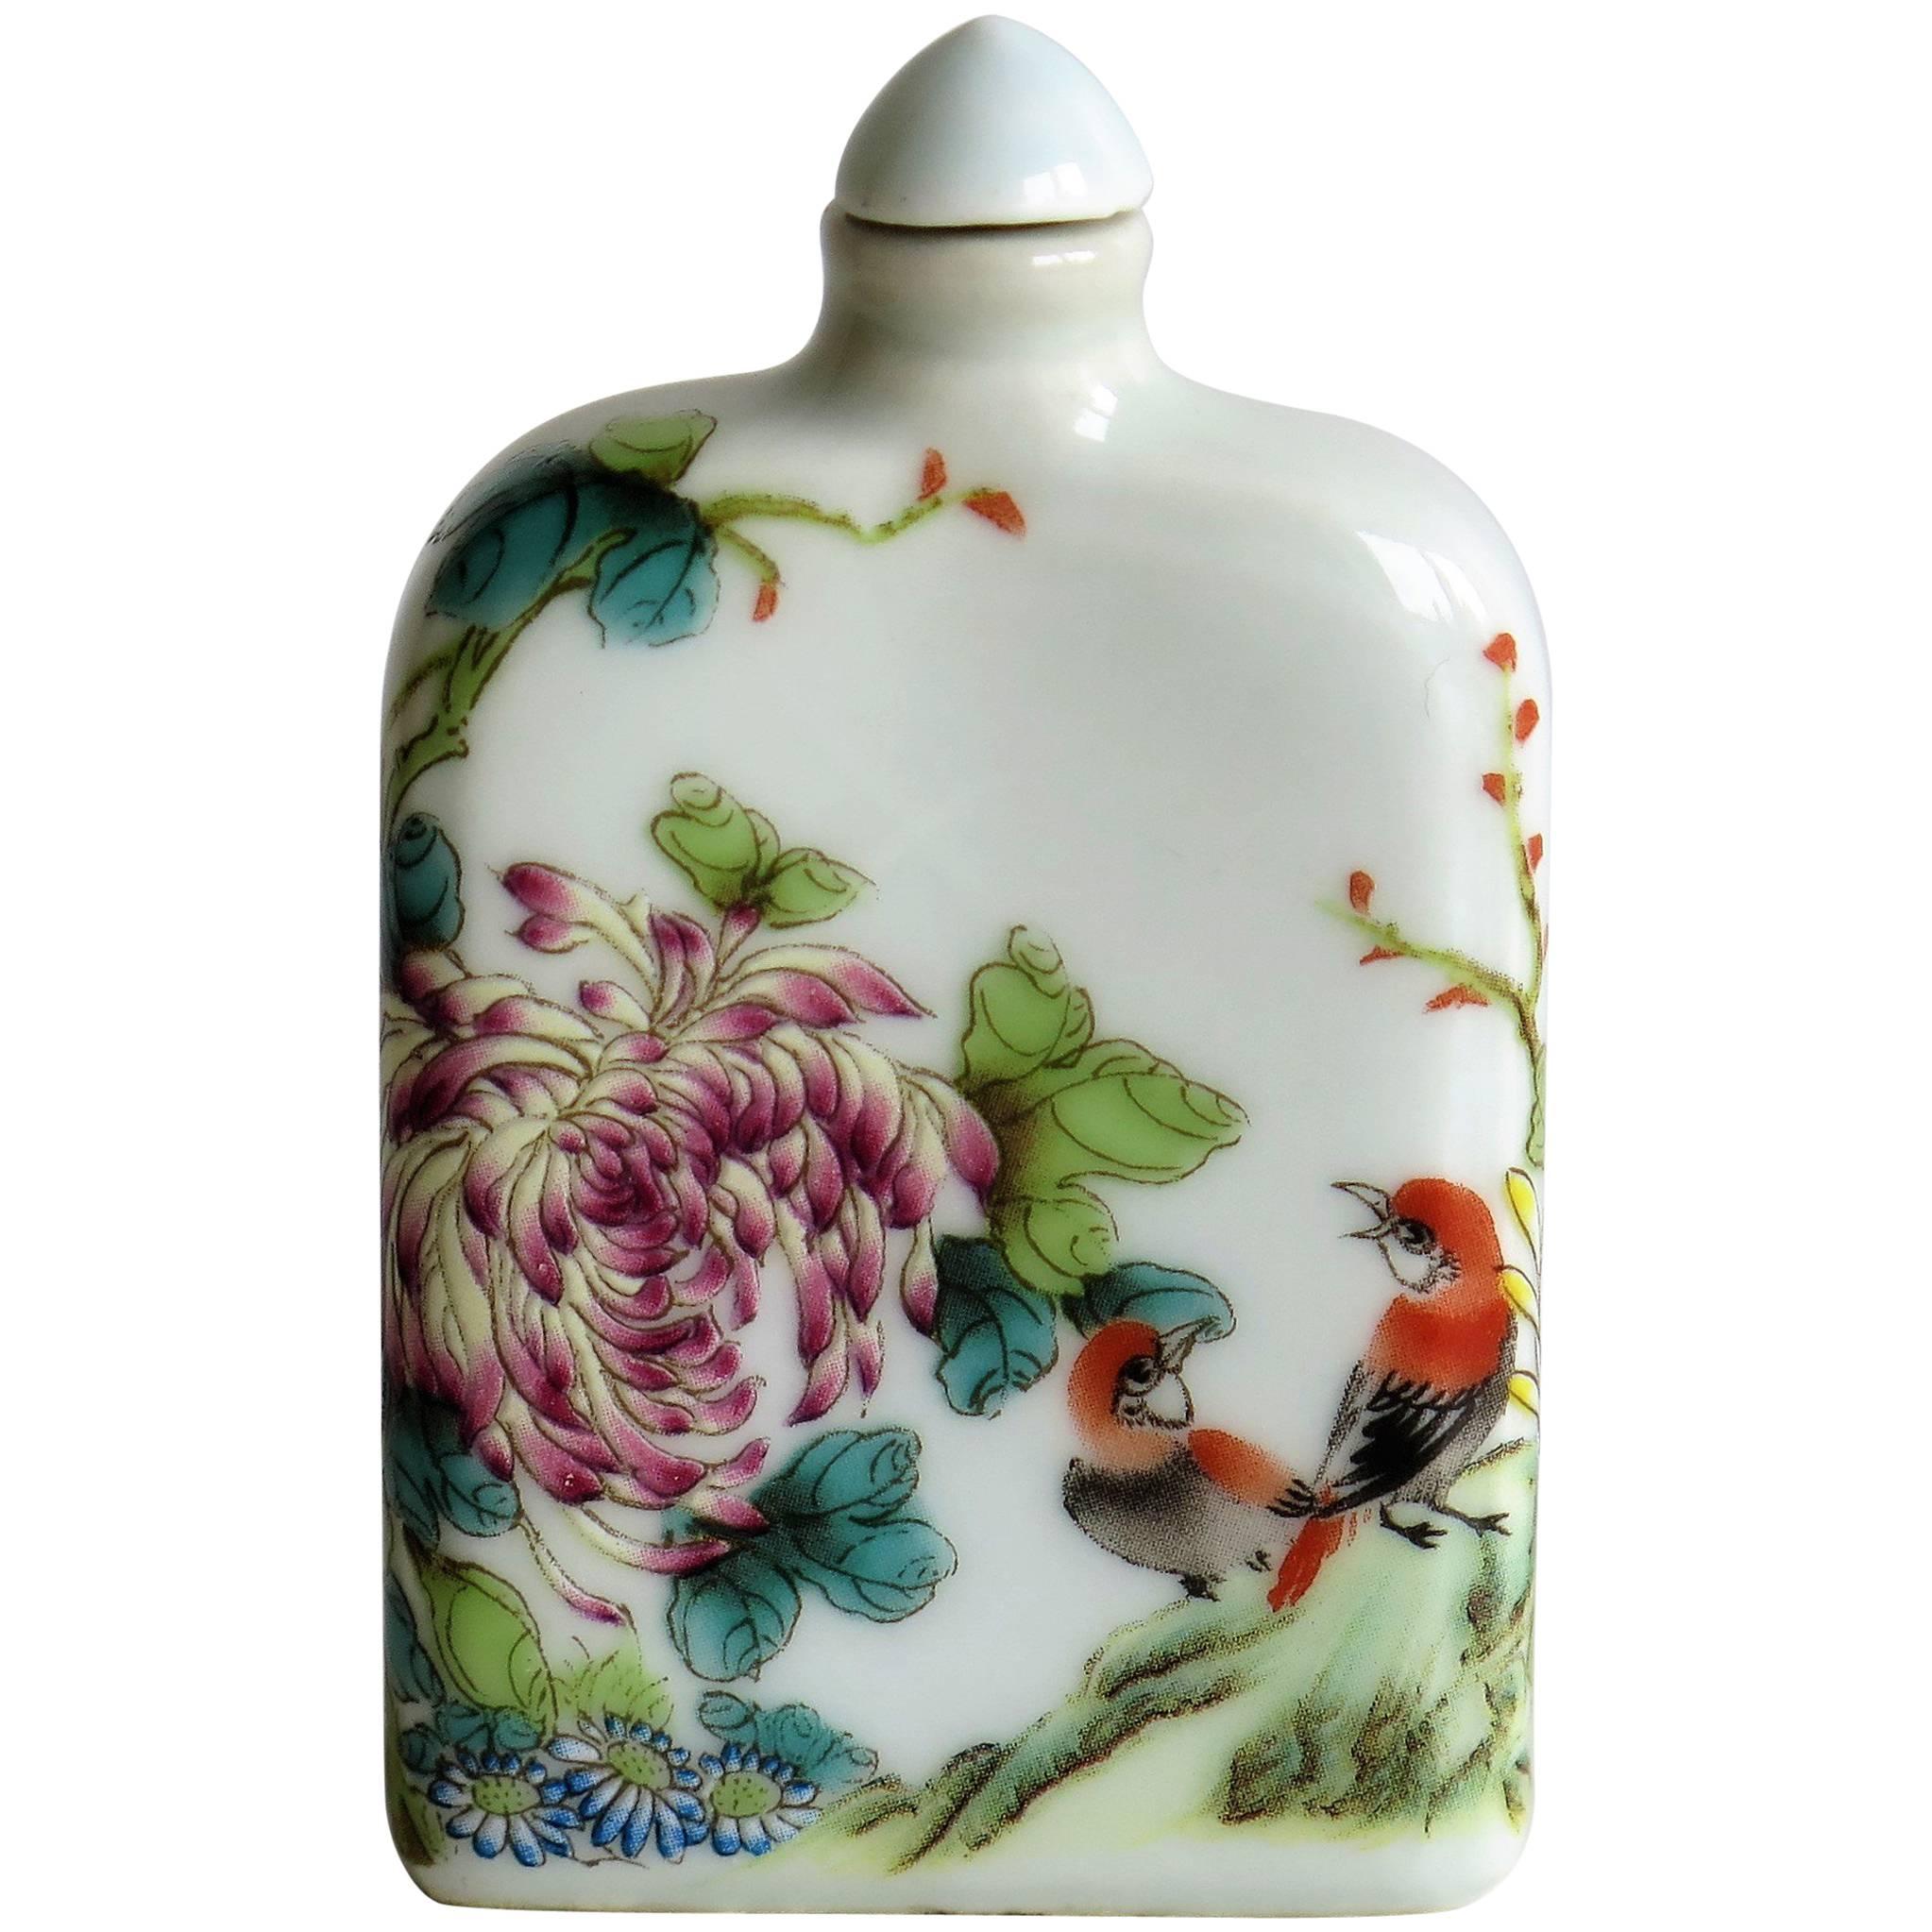 Chinese Porcelain Snuff Bottle Hand-Painted Birds and Flowers, Circa 1940s